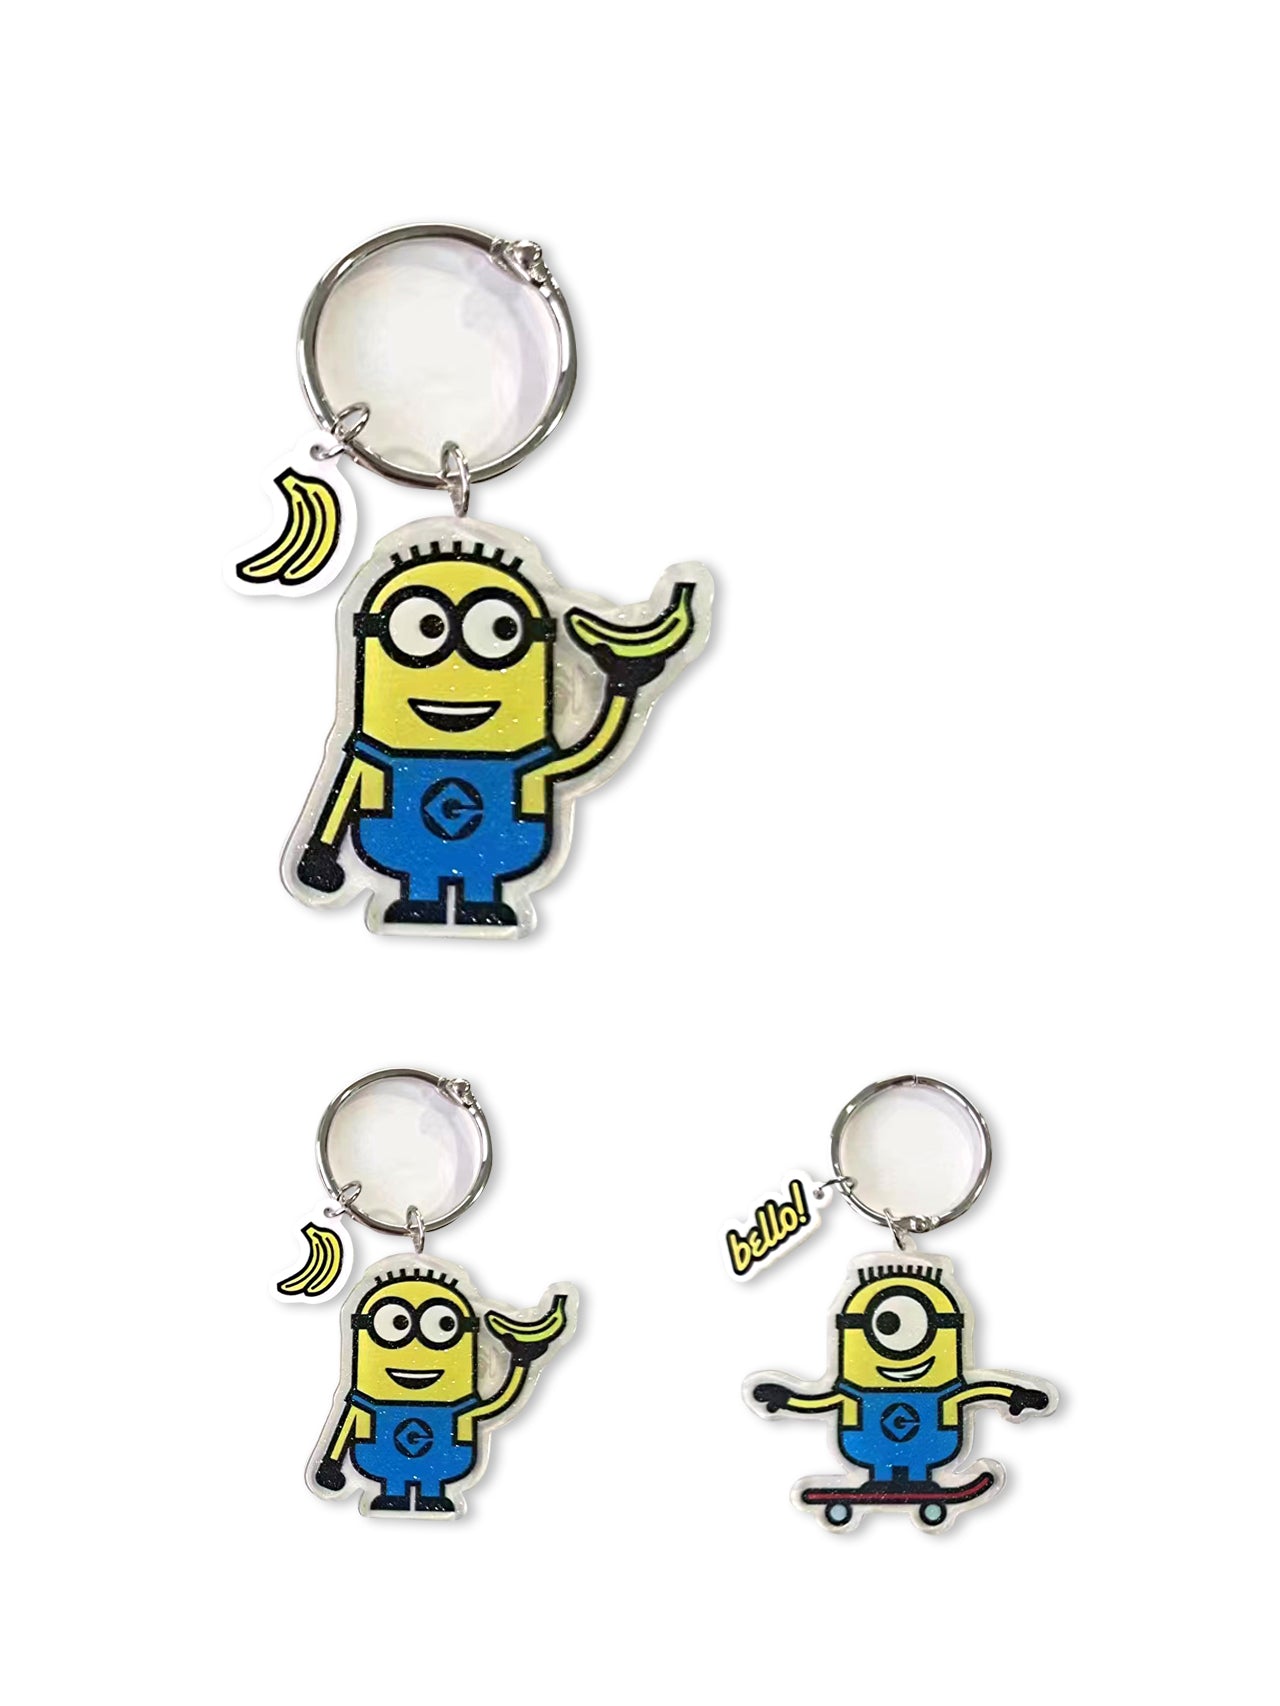 MINISO MINIONS COLLECTION ACRYLIC KEYCHAIN 2014229810102 FASHIONABLE ORNAMENTS